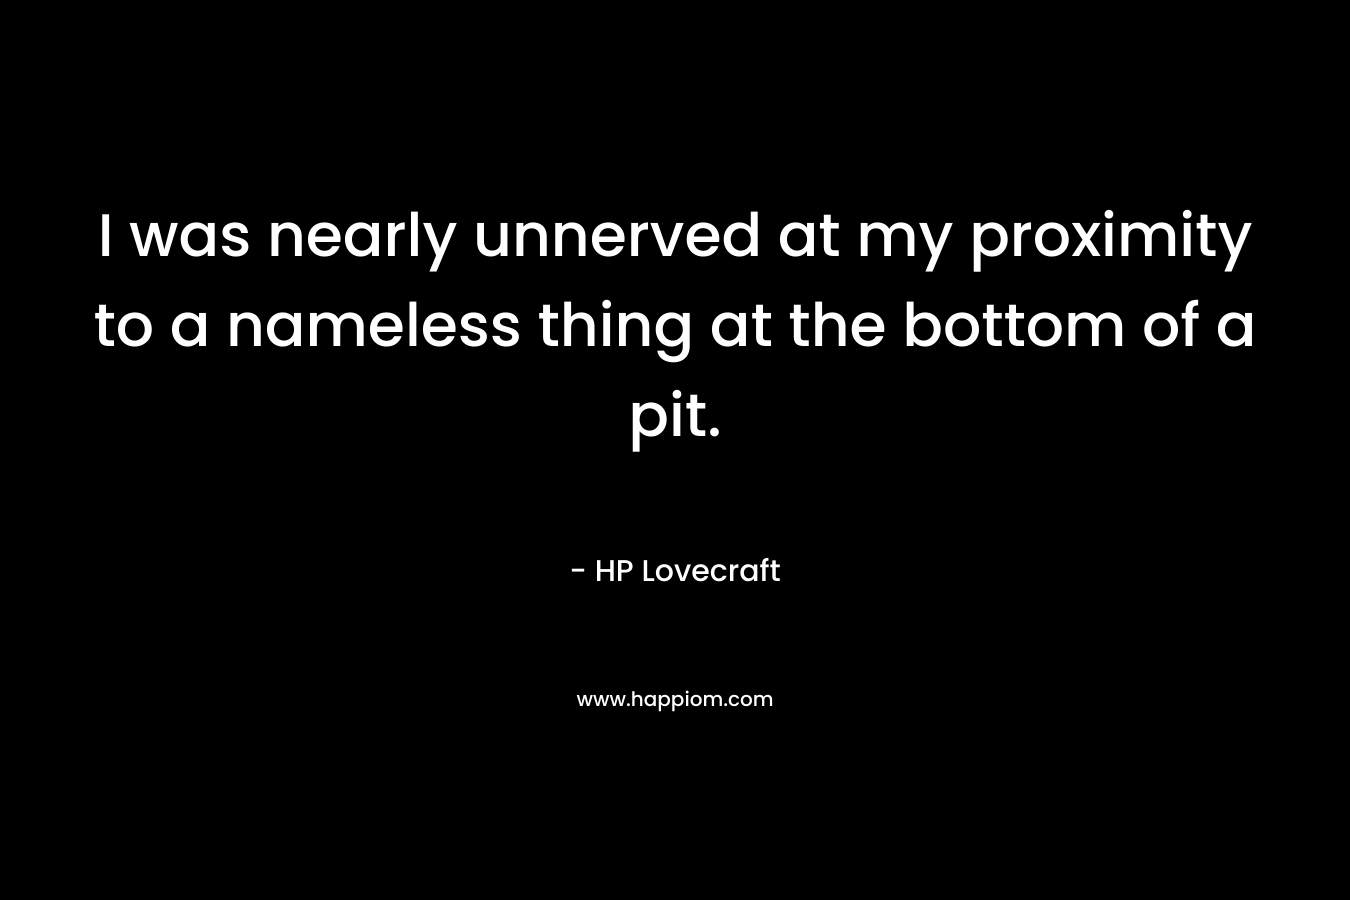 I was nearly unnerved at my proximity to a nameless thing at the bottom of a pit. – HP Lovecraft